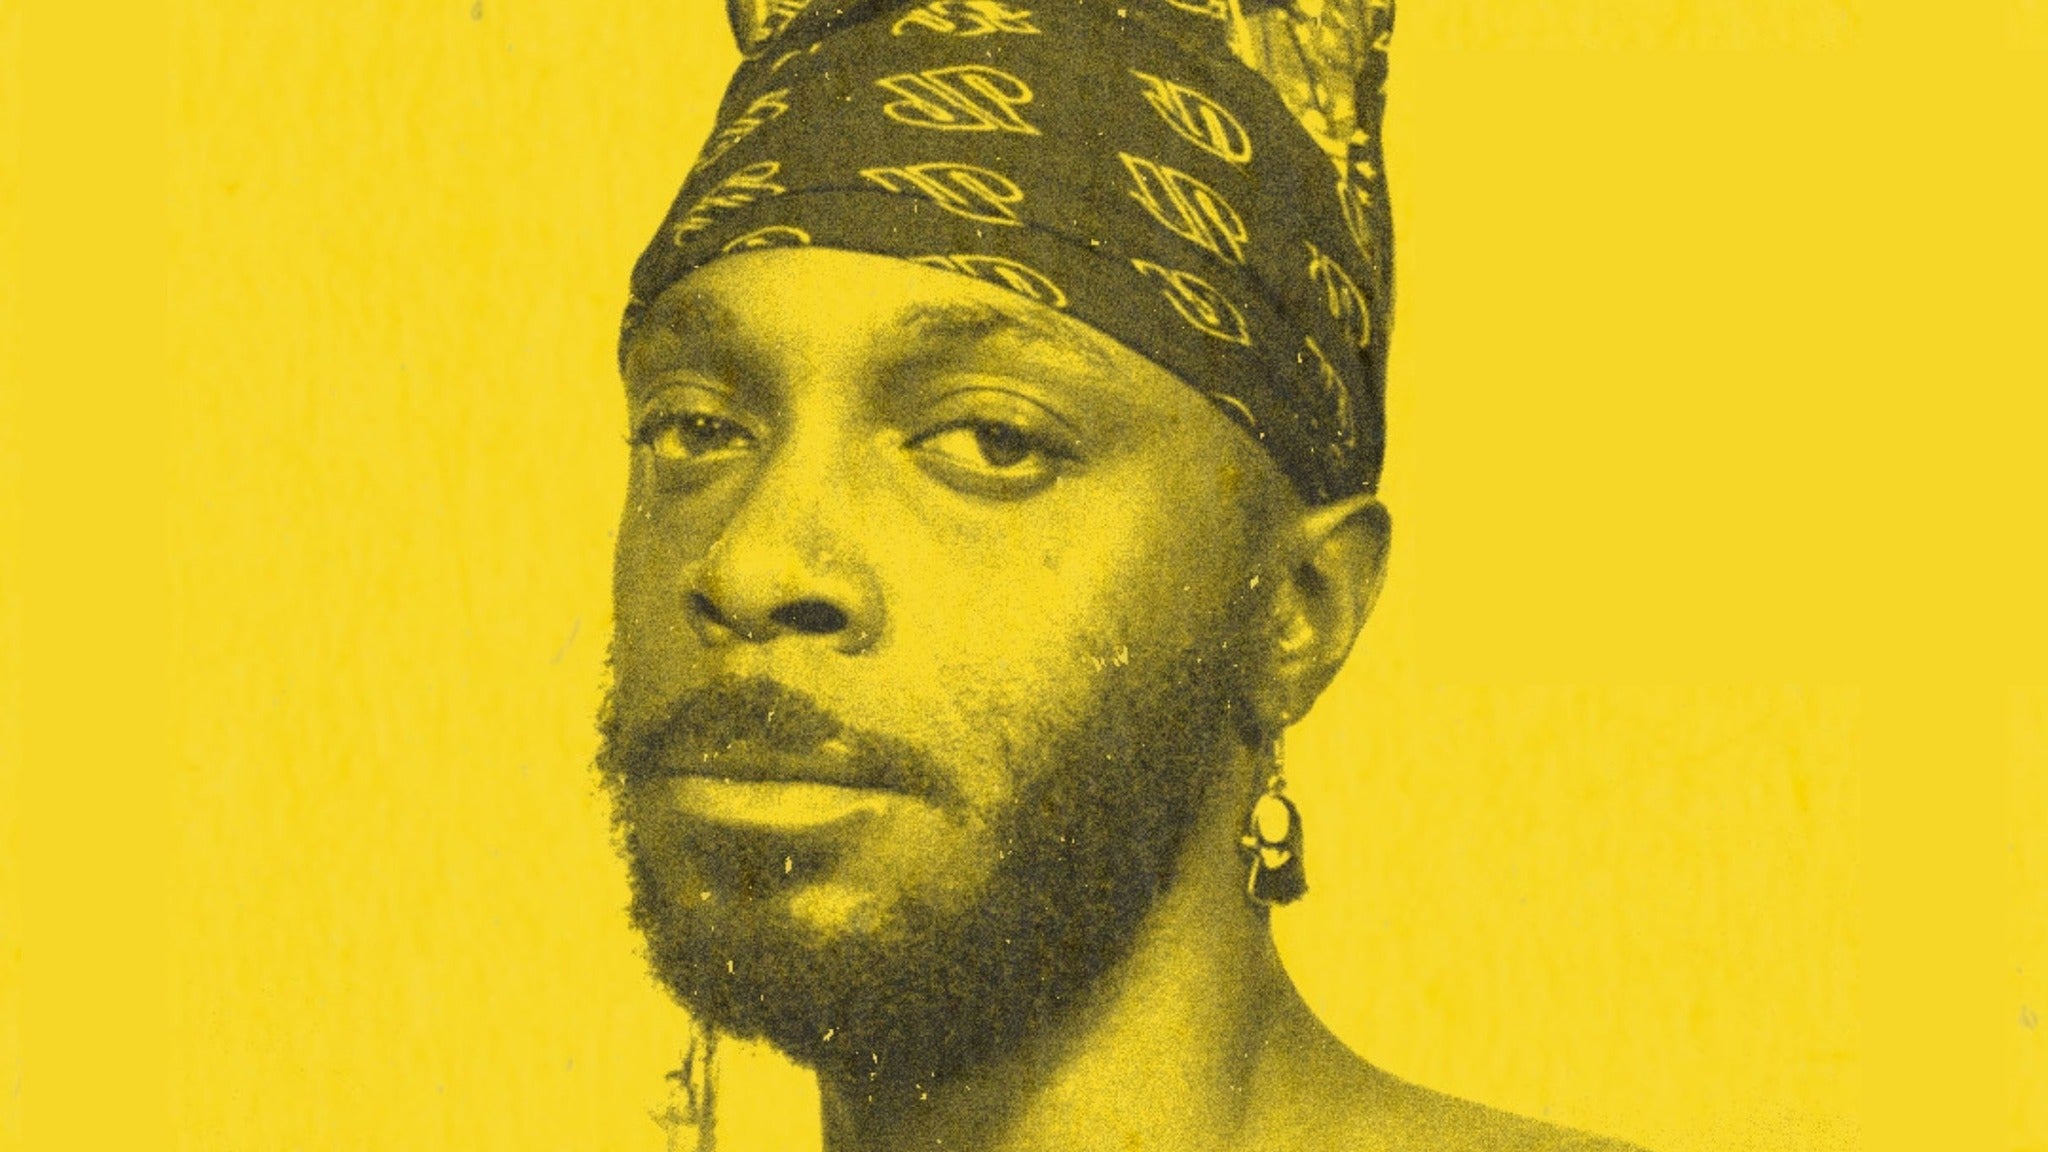 Image used with permission from Ticketmaster | JPEGMAFIA tickets